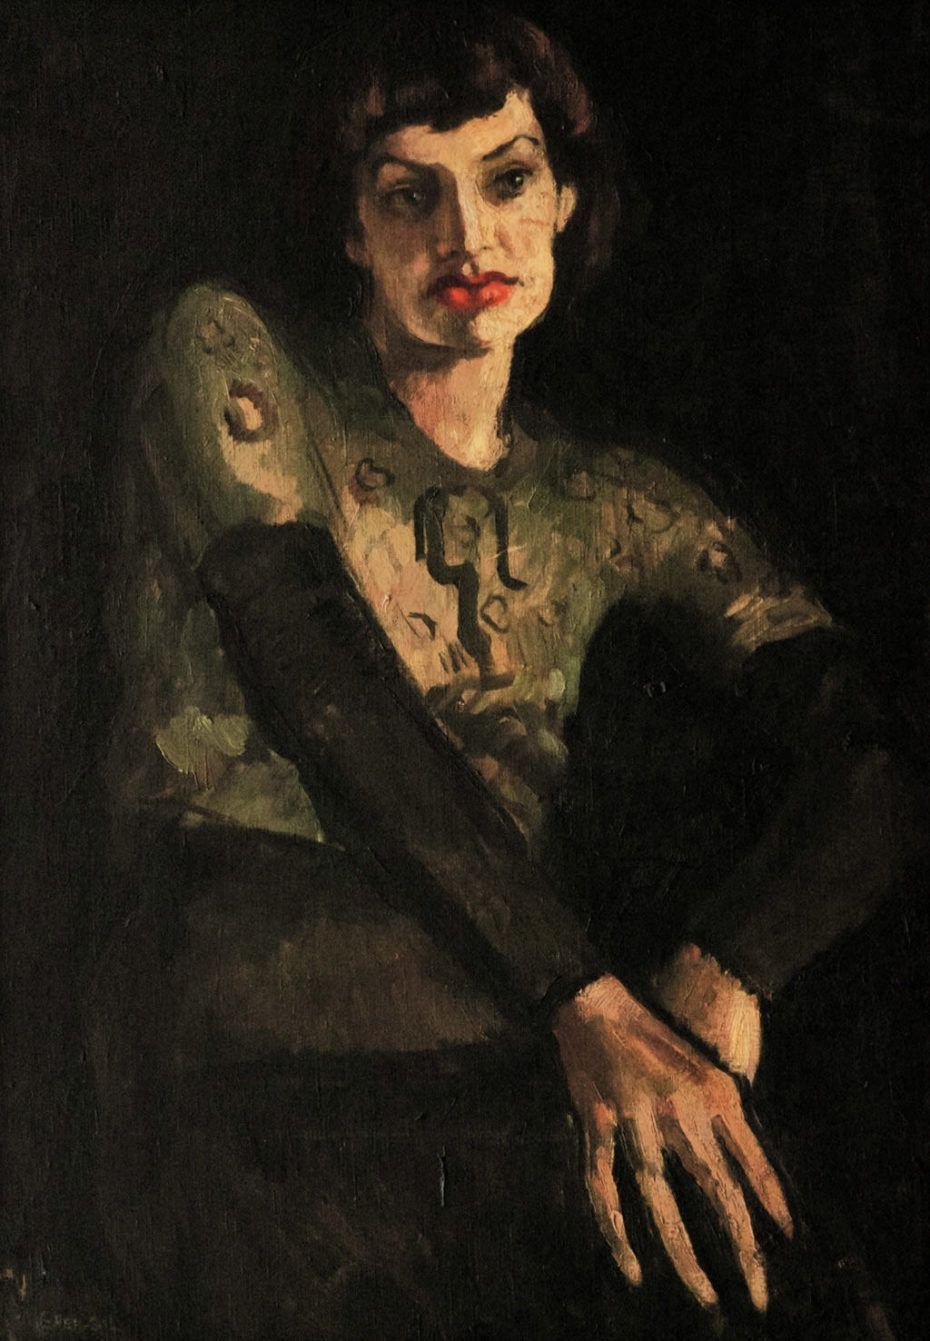 Chân dung Marie Louise Chassany của Amrita Sher-Gil